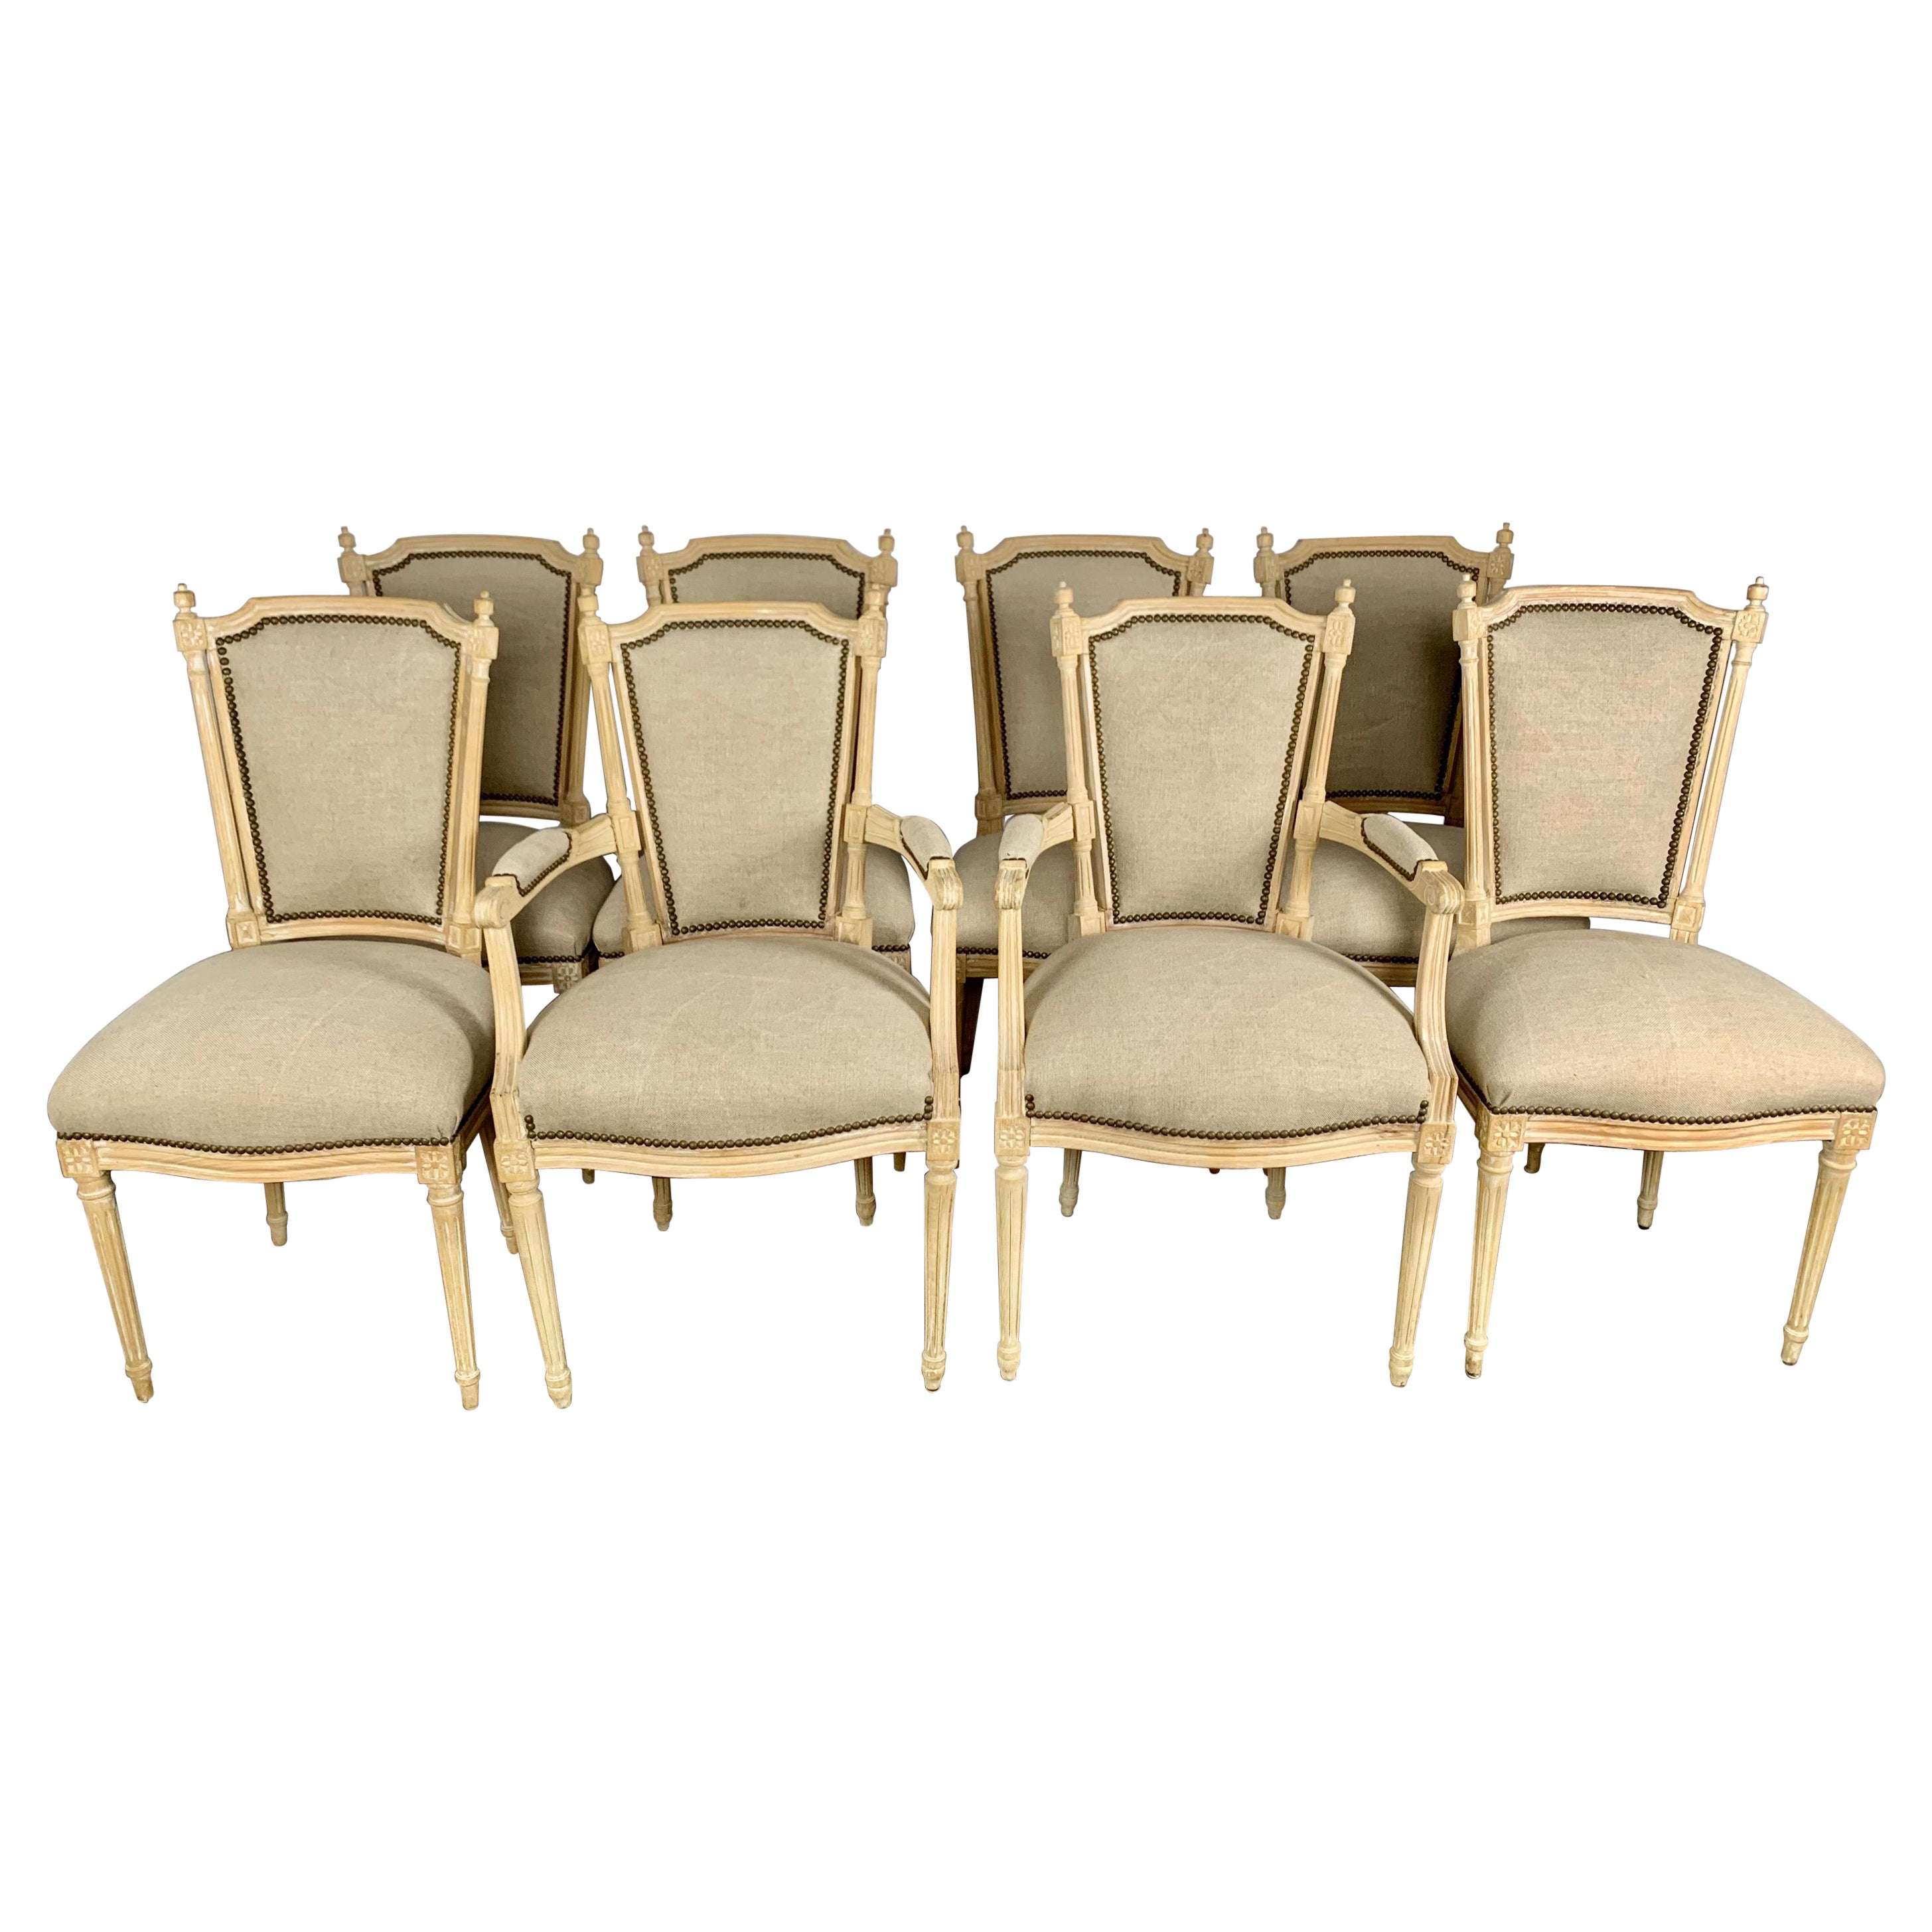 Set of '8' French Louis XVI Style Dining Room Chairs